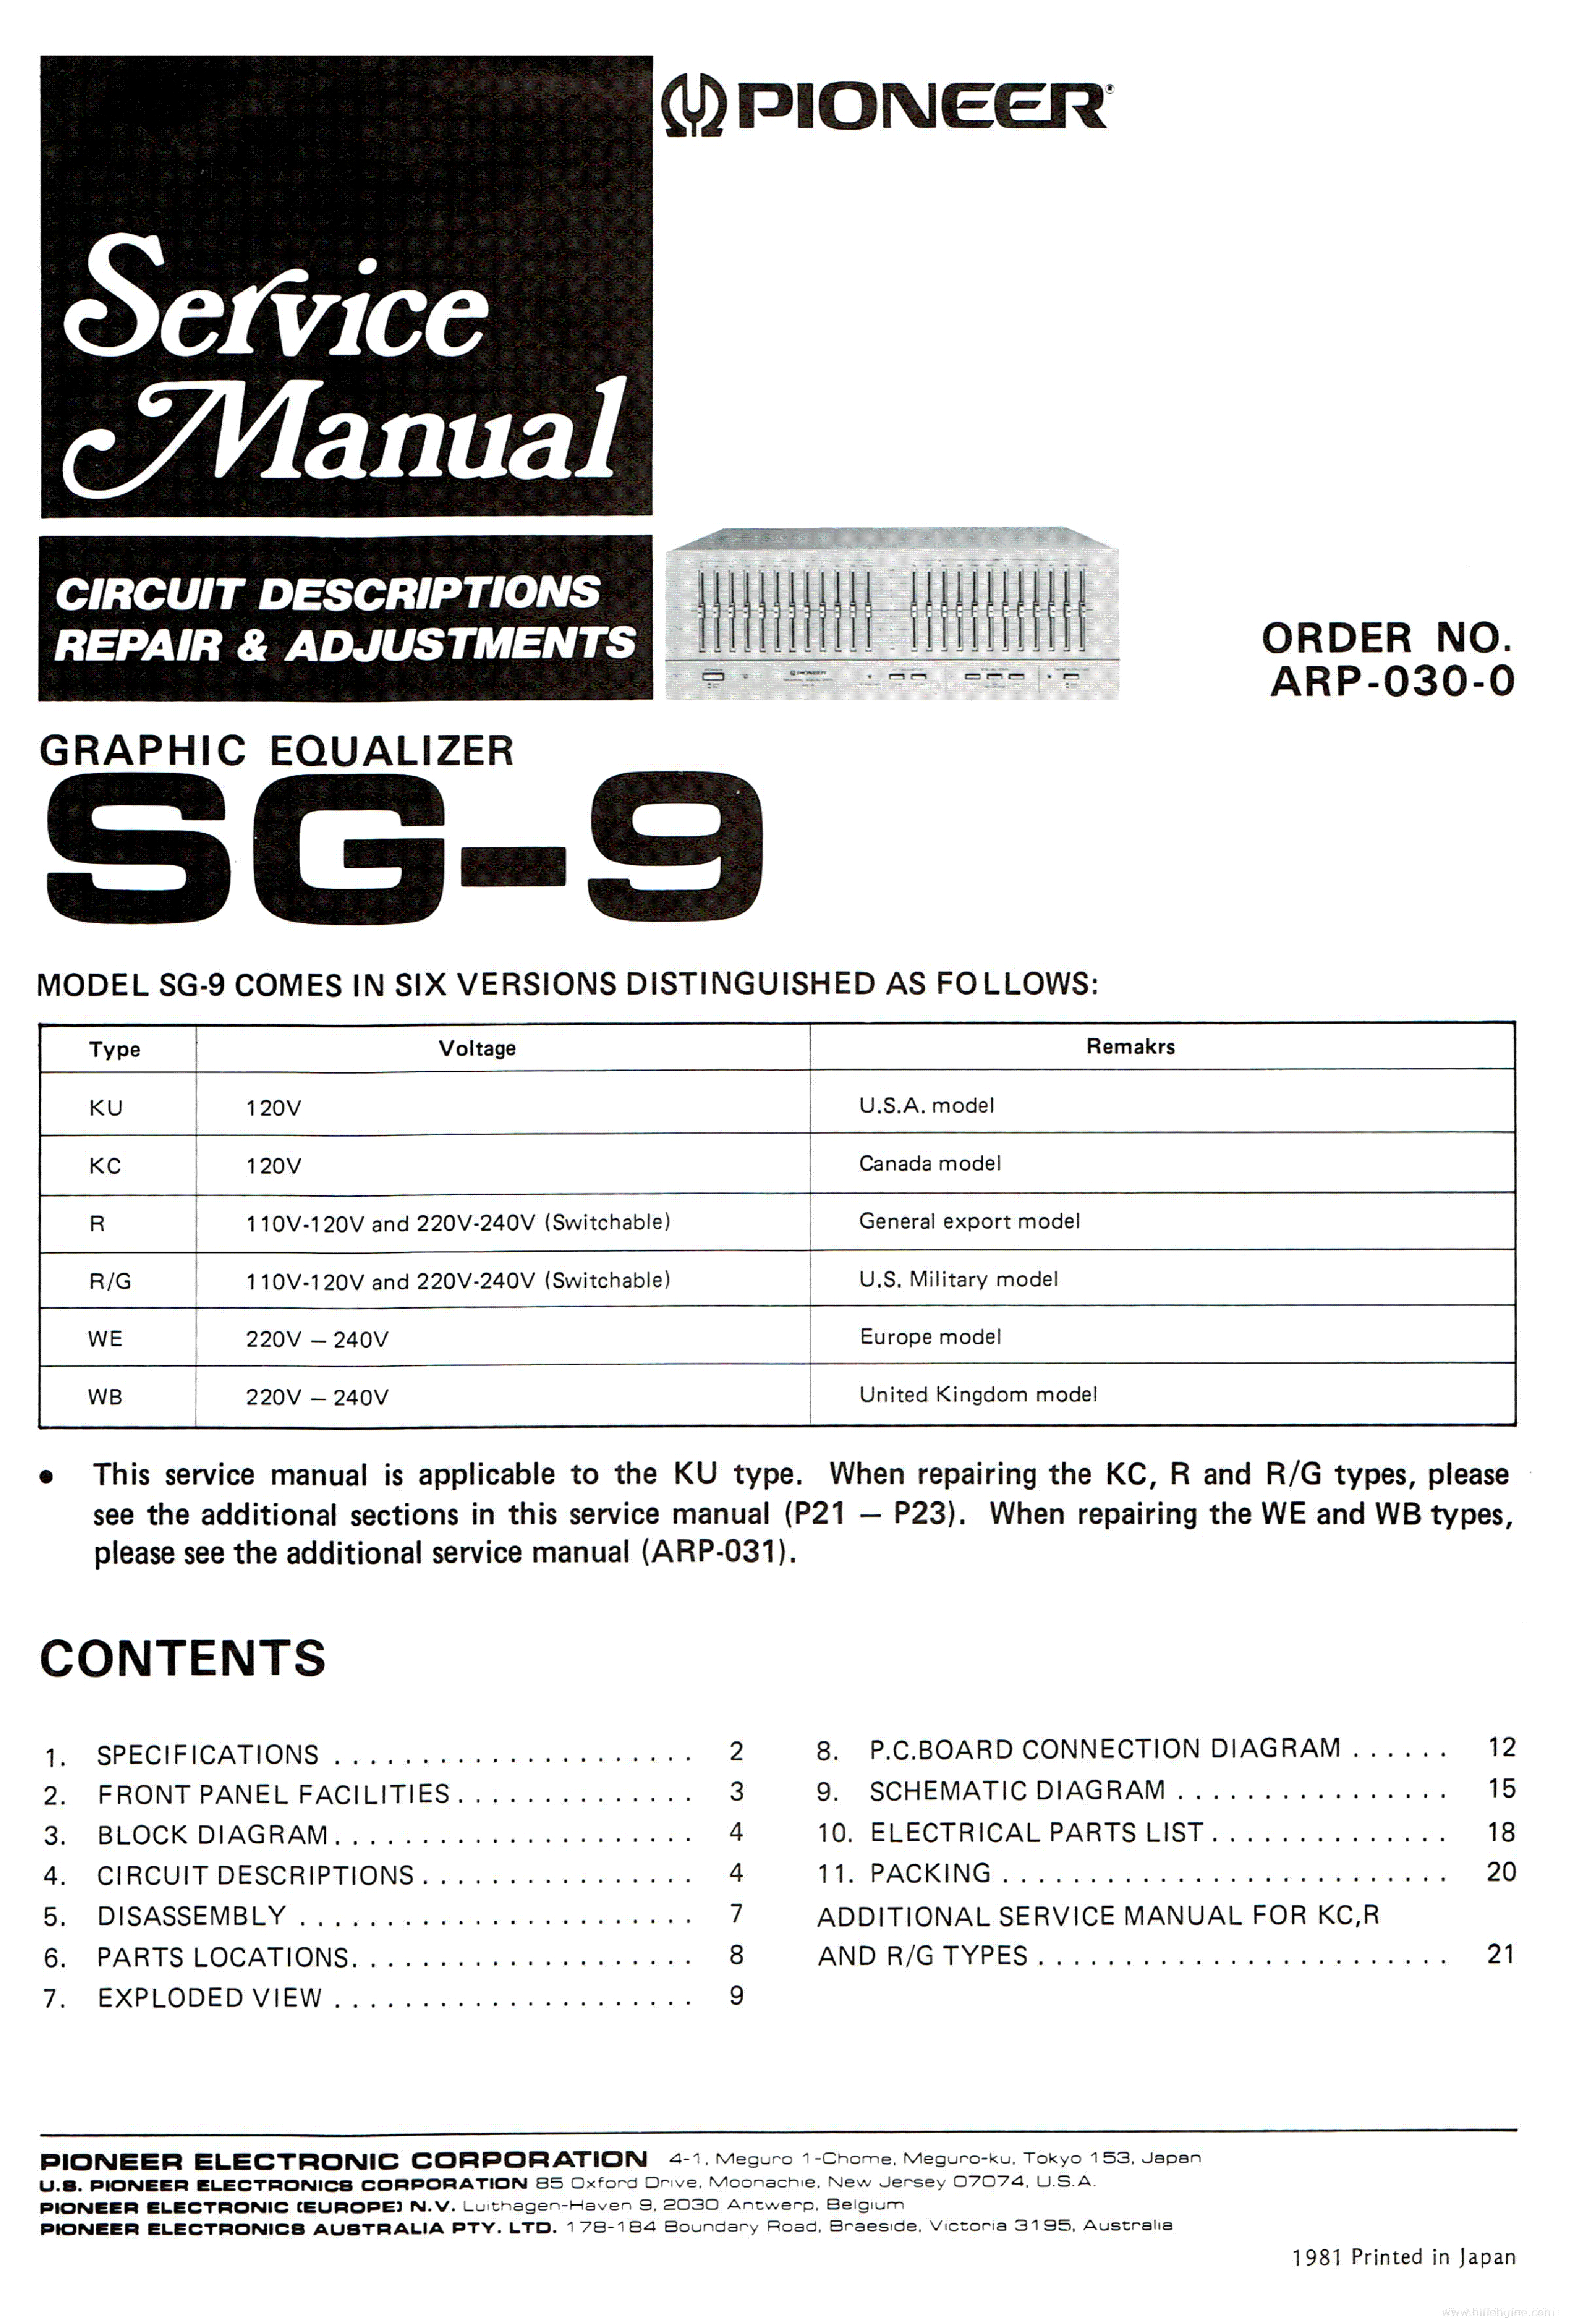 PIONEER SG-9 ARP0300 service manual (1st page)